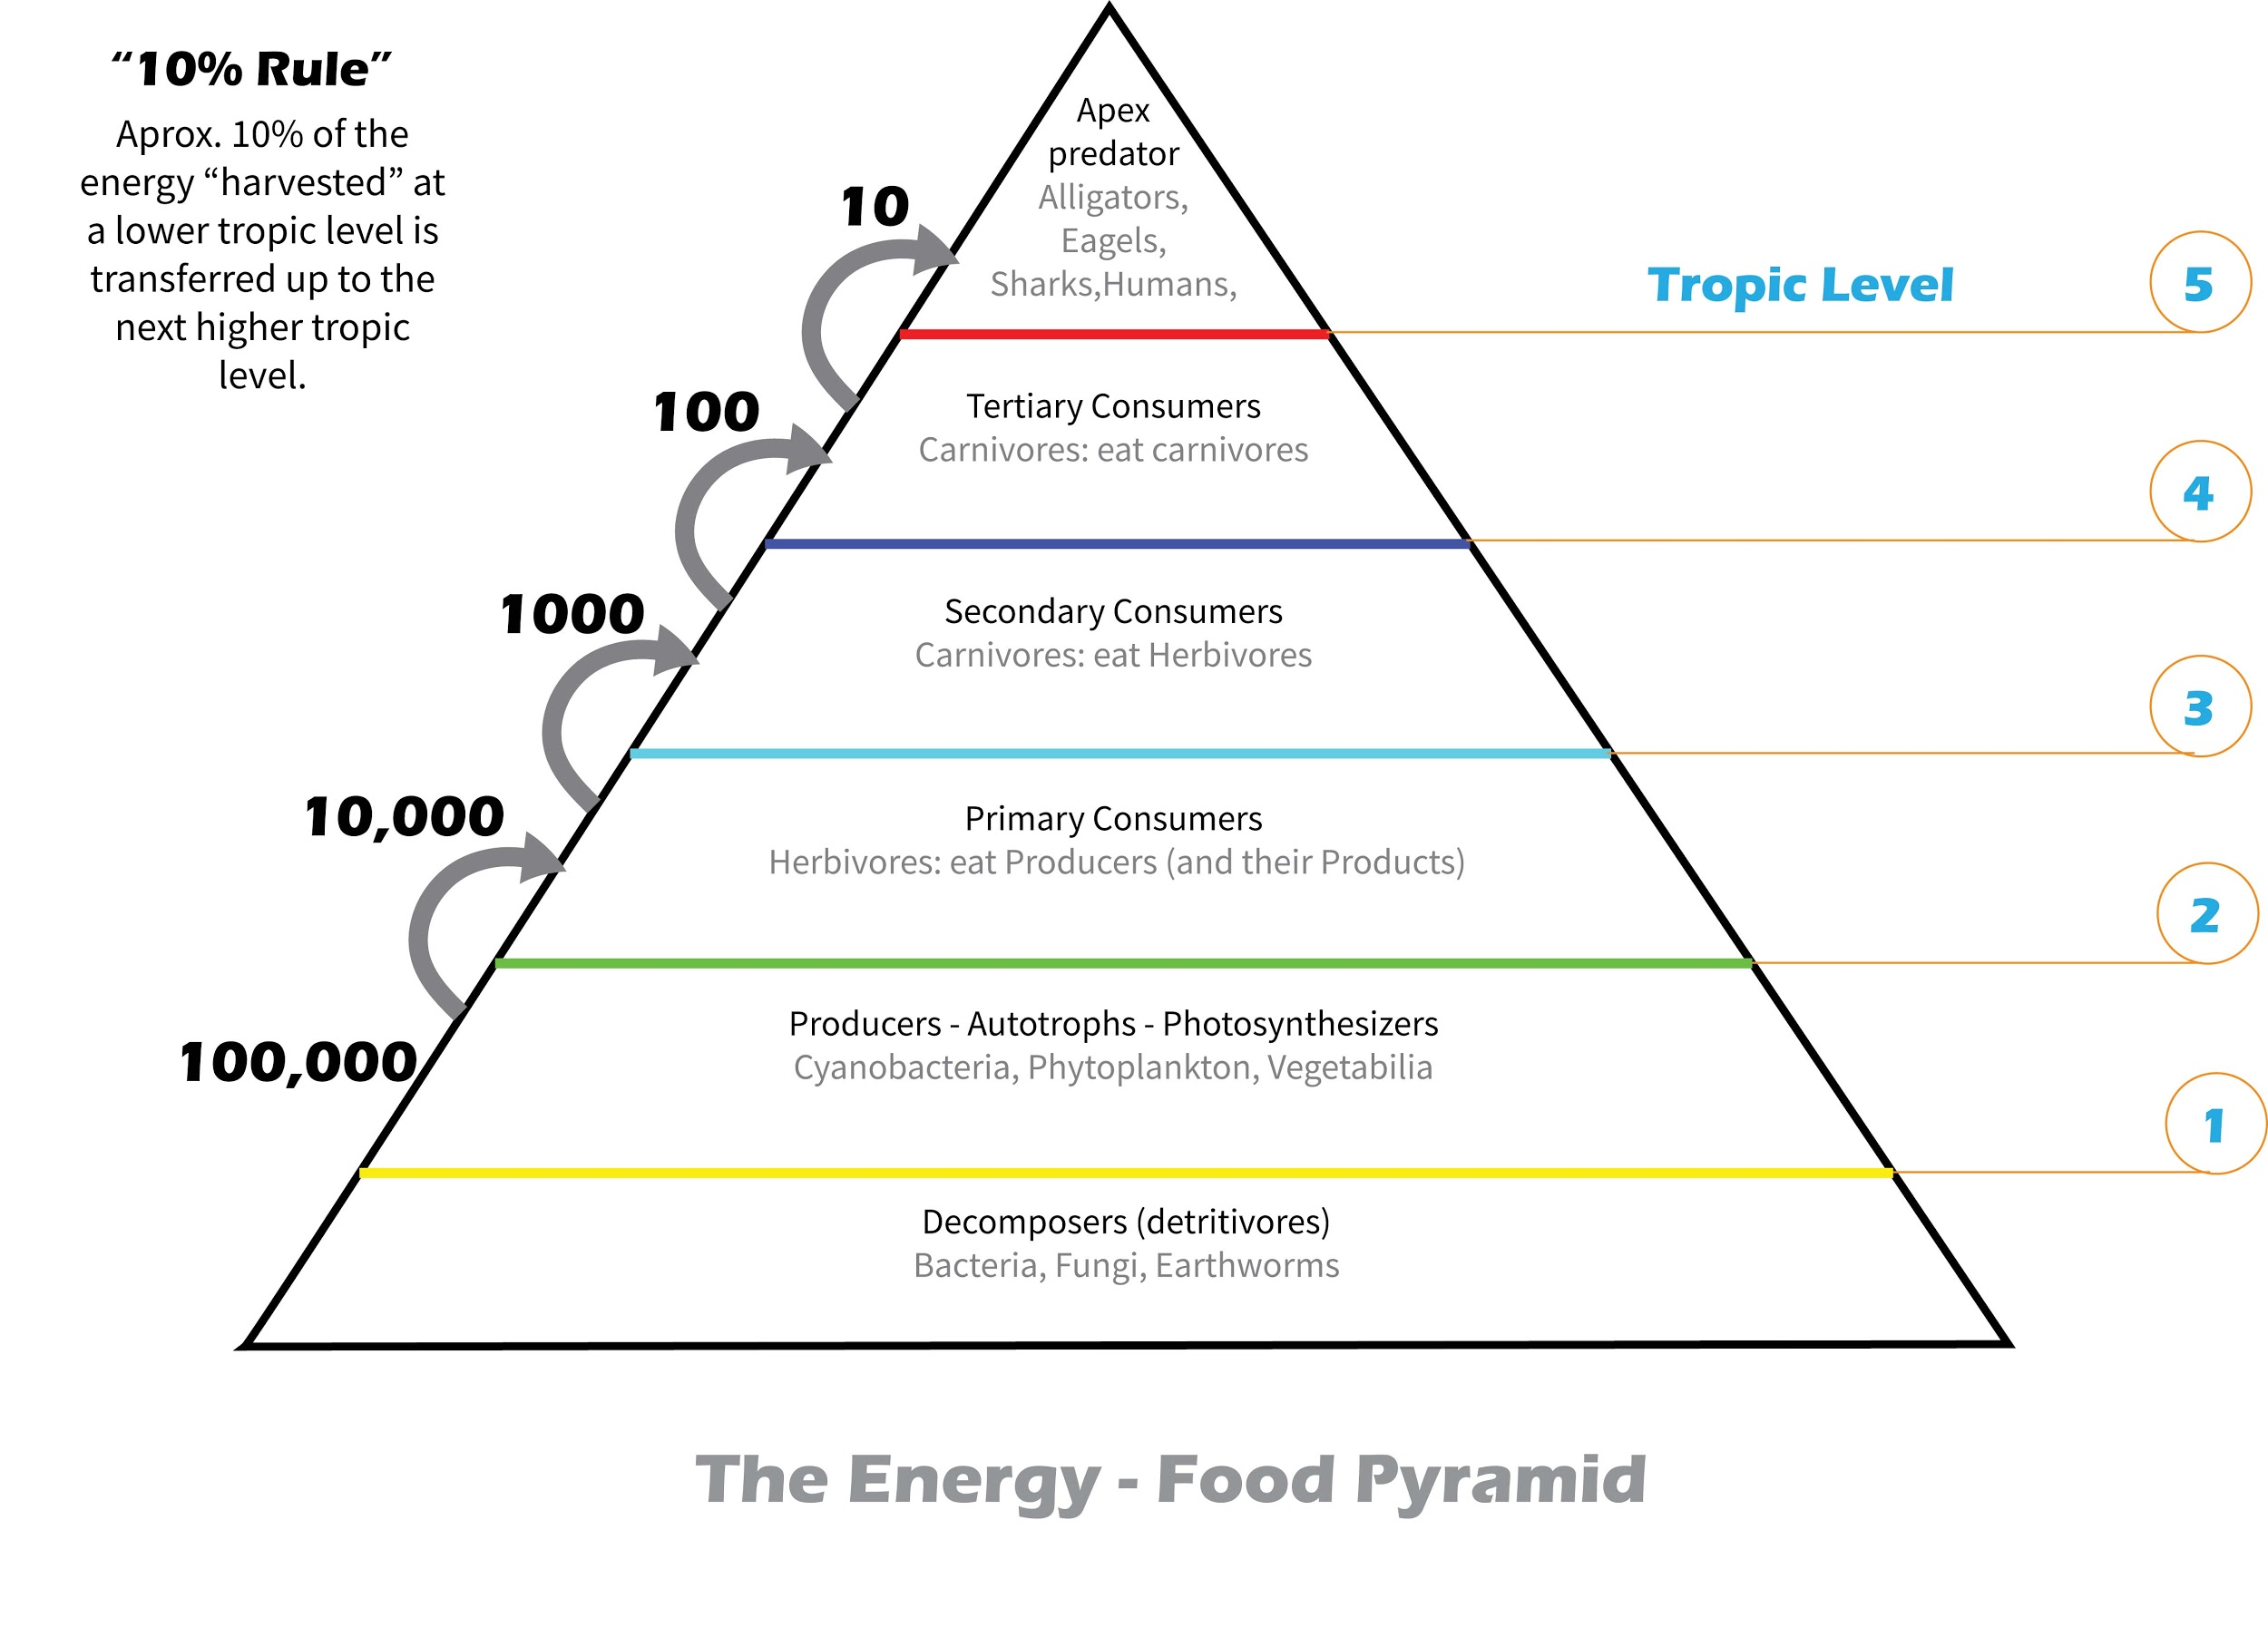 ecological-pyramids-worksheet-answers